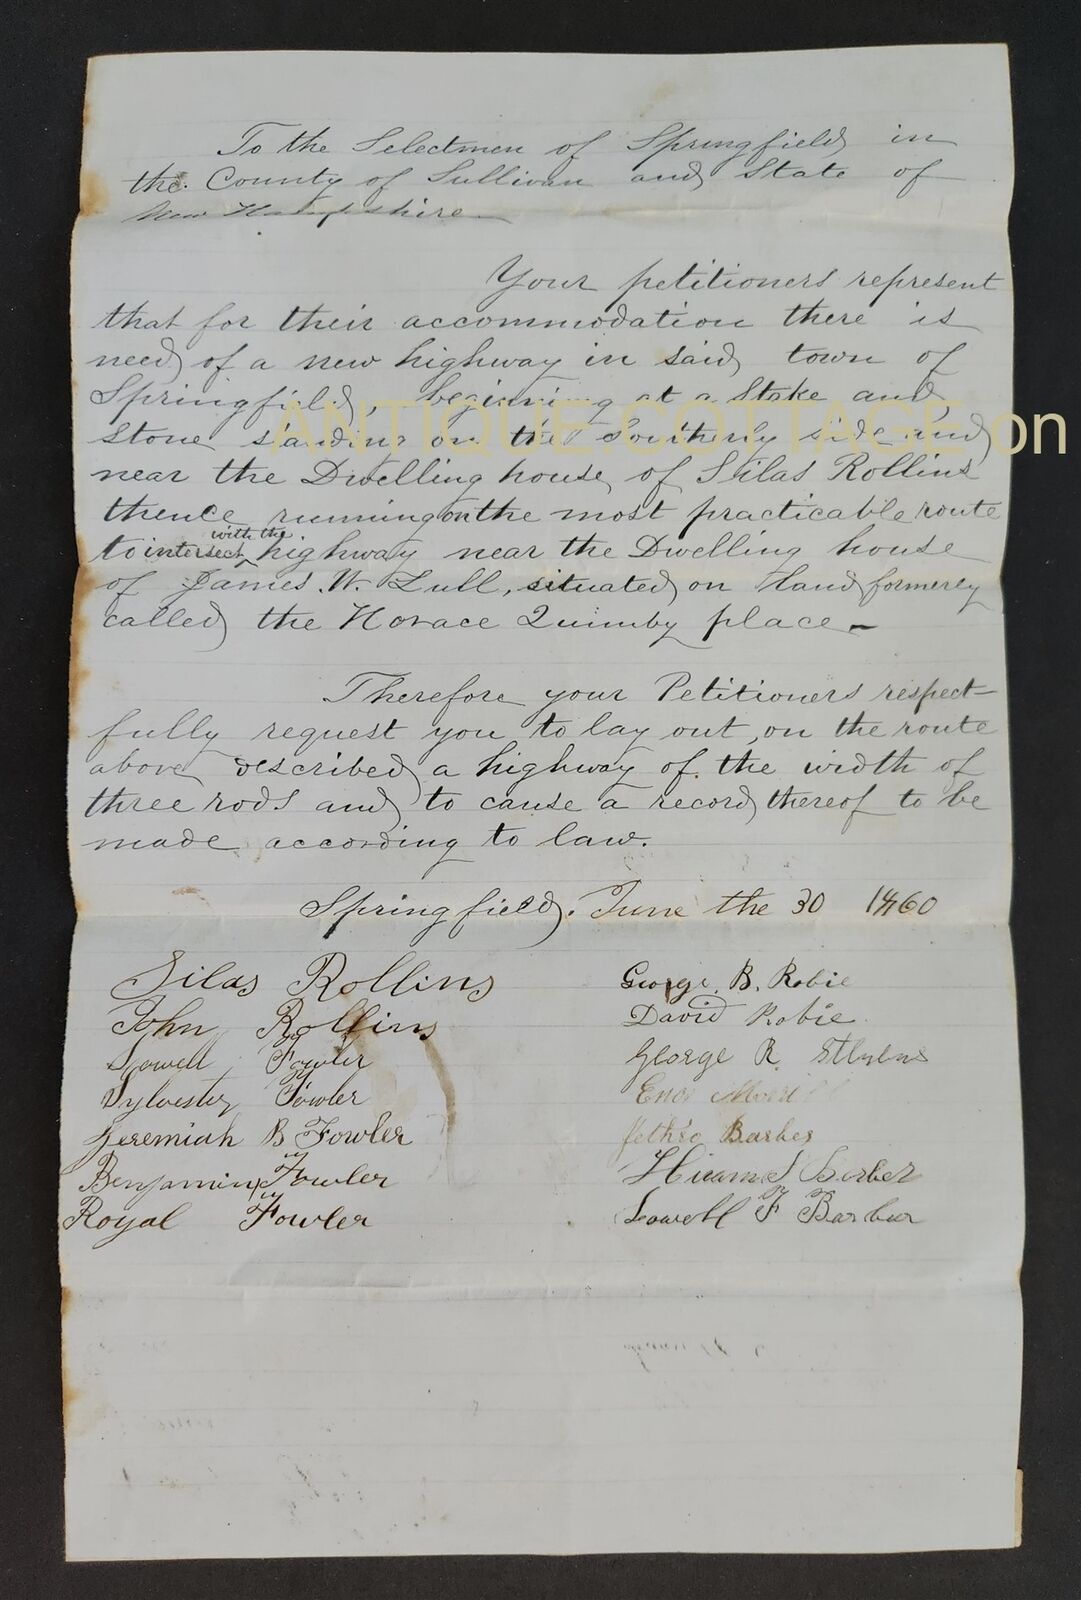 1860 antique SULLIVAN SPRINGFIELD nh PETITION for HIGHWAY lull quimby rollins